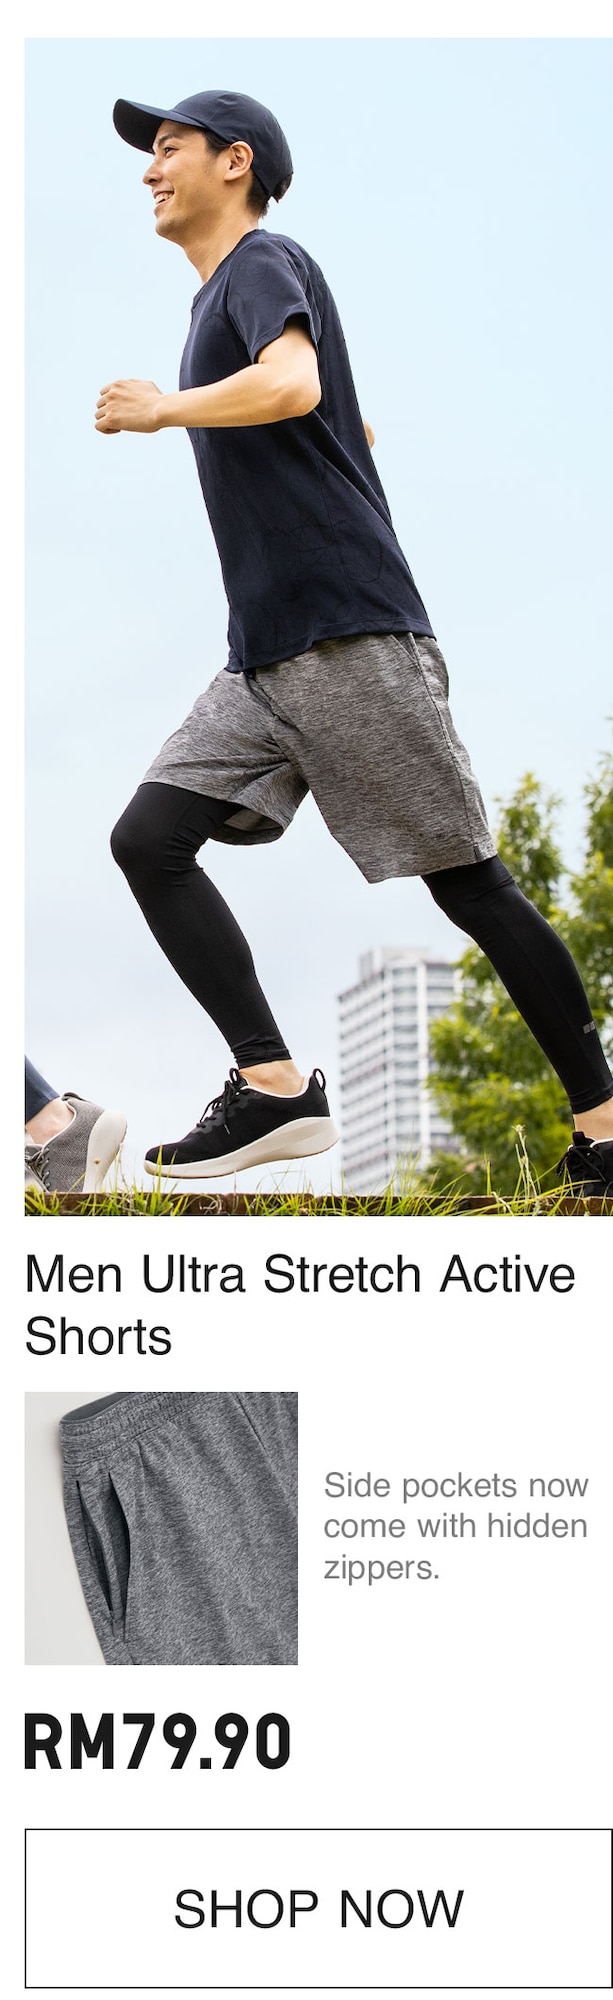 ULTRA STRETCH ACTIVE SHORTS